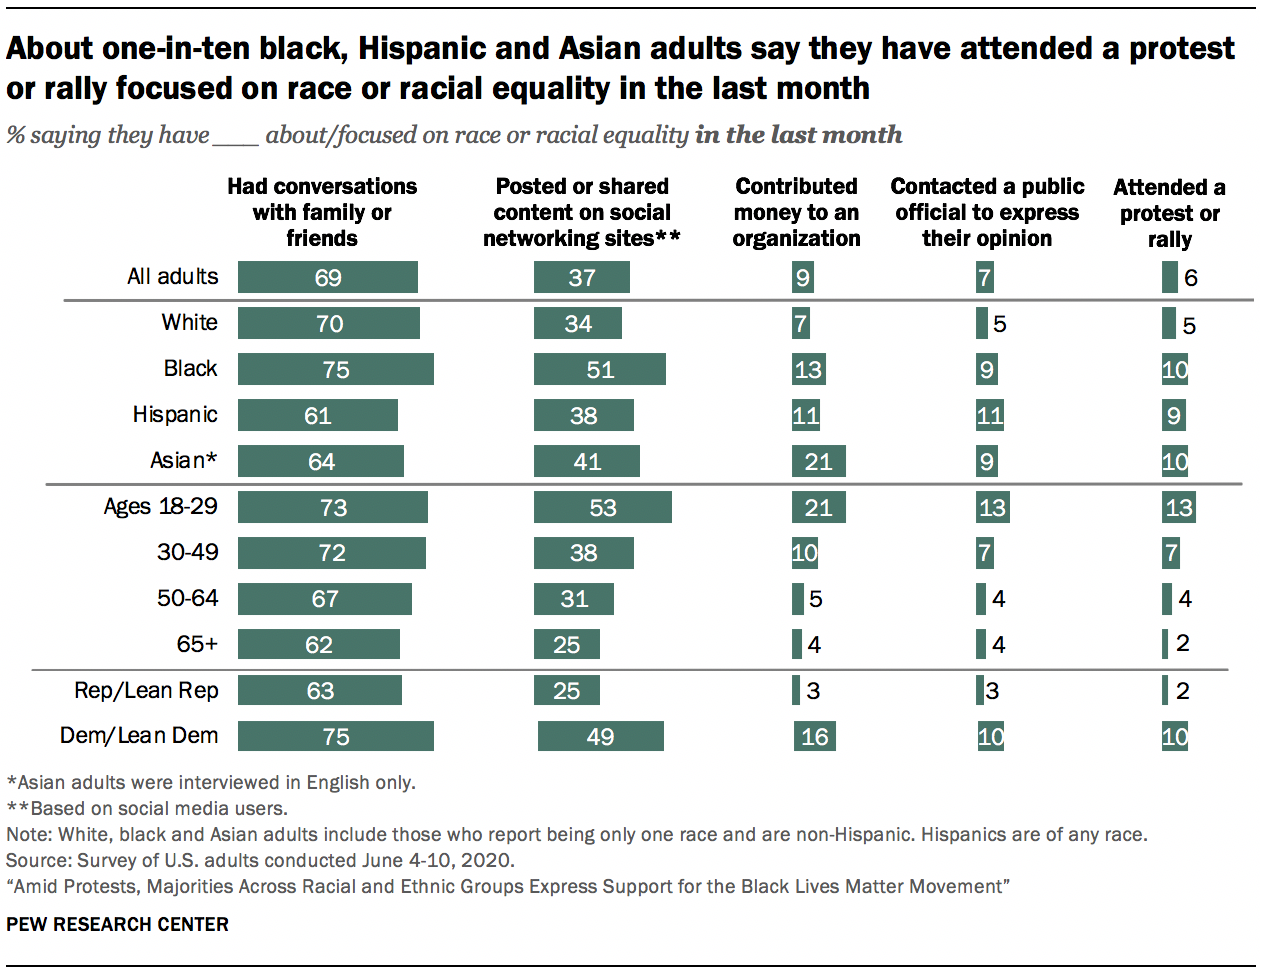 About one-in-ten black, Hispanic and Asian adults say they have attended a protest or rally focused on race or racial equality in the last month